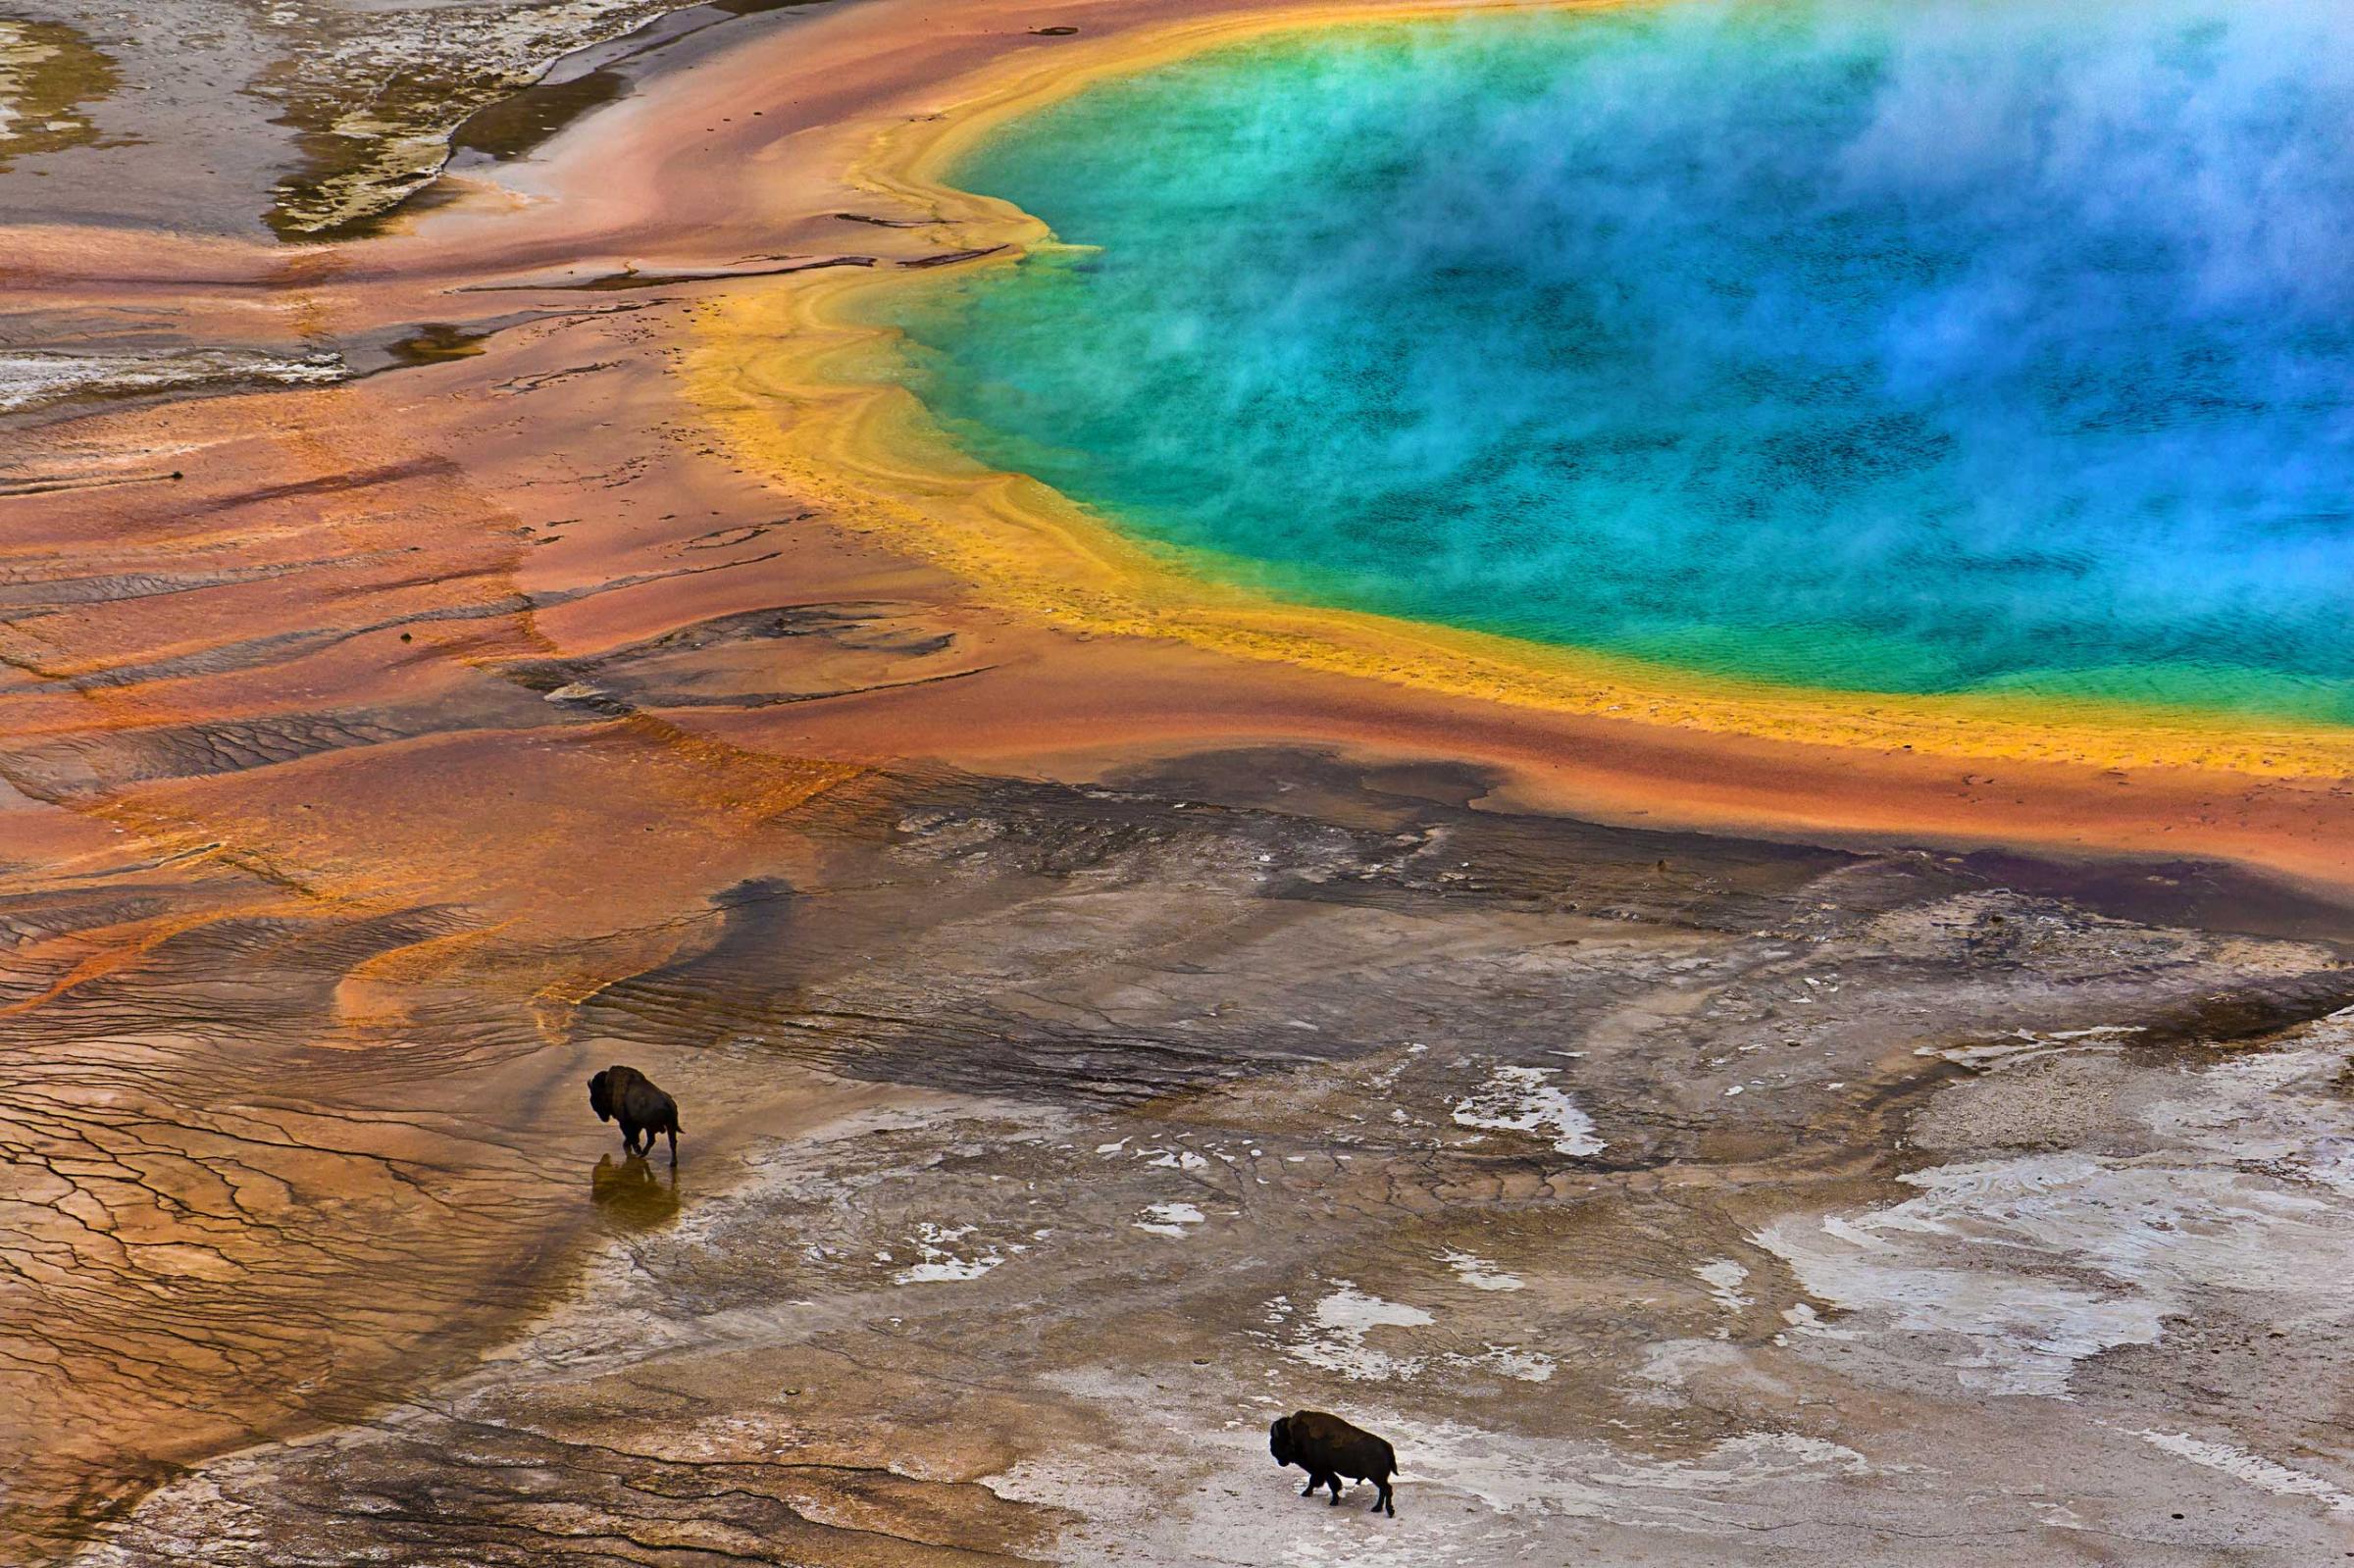 Two Bisons on the Grand Prismatic Spring in Yellowstone National Park, Wyo.